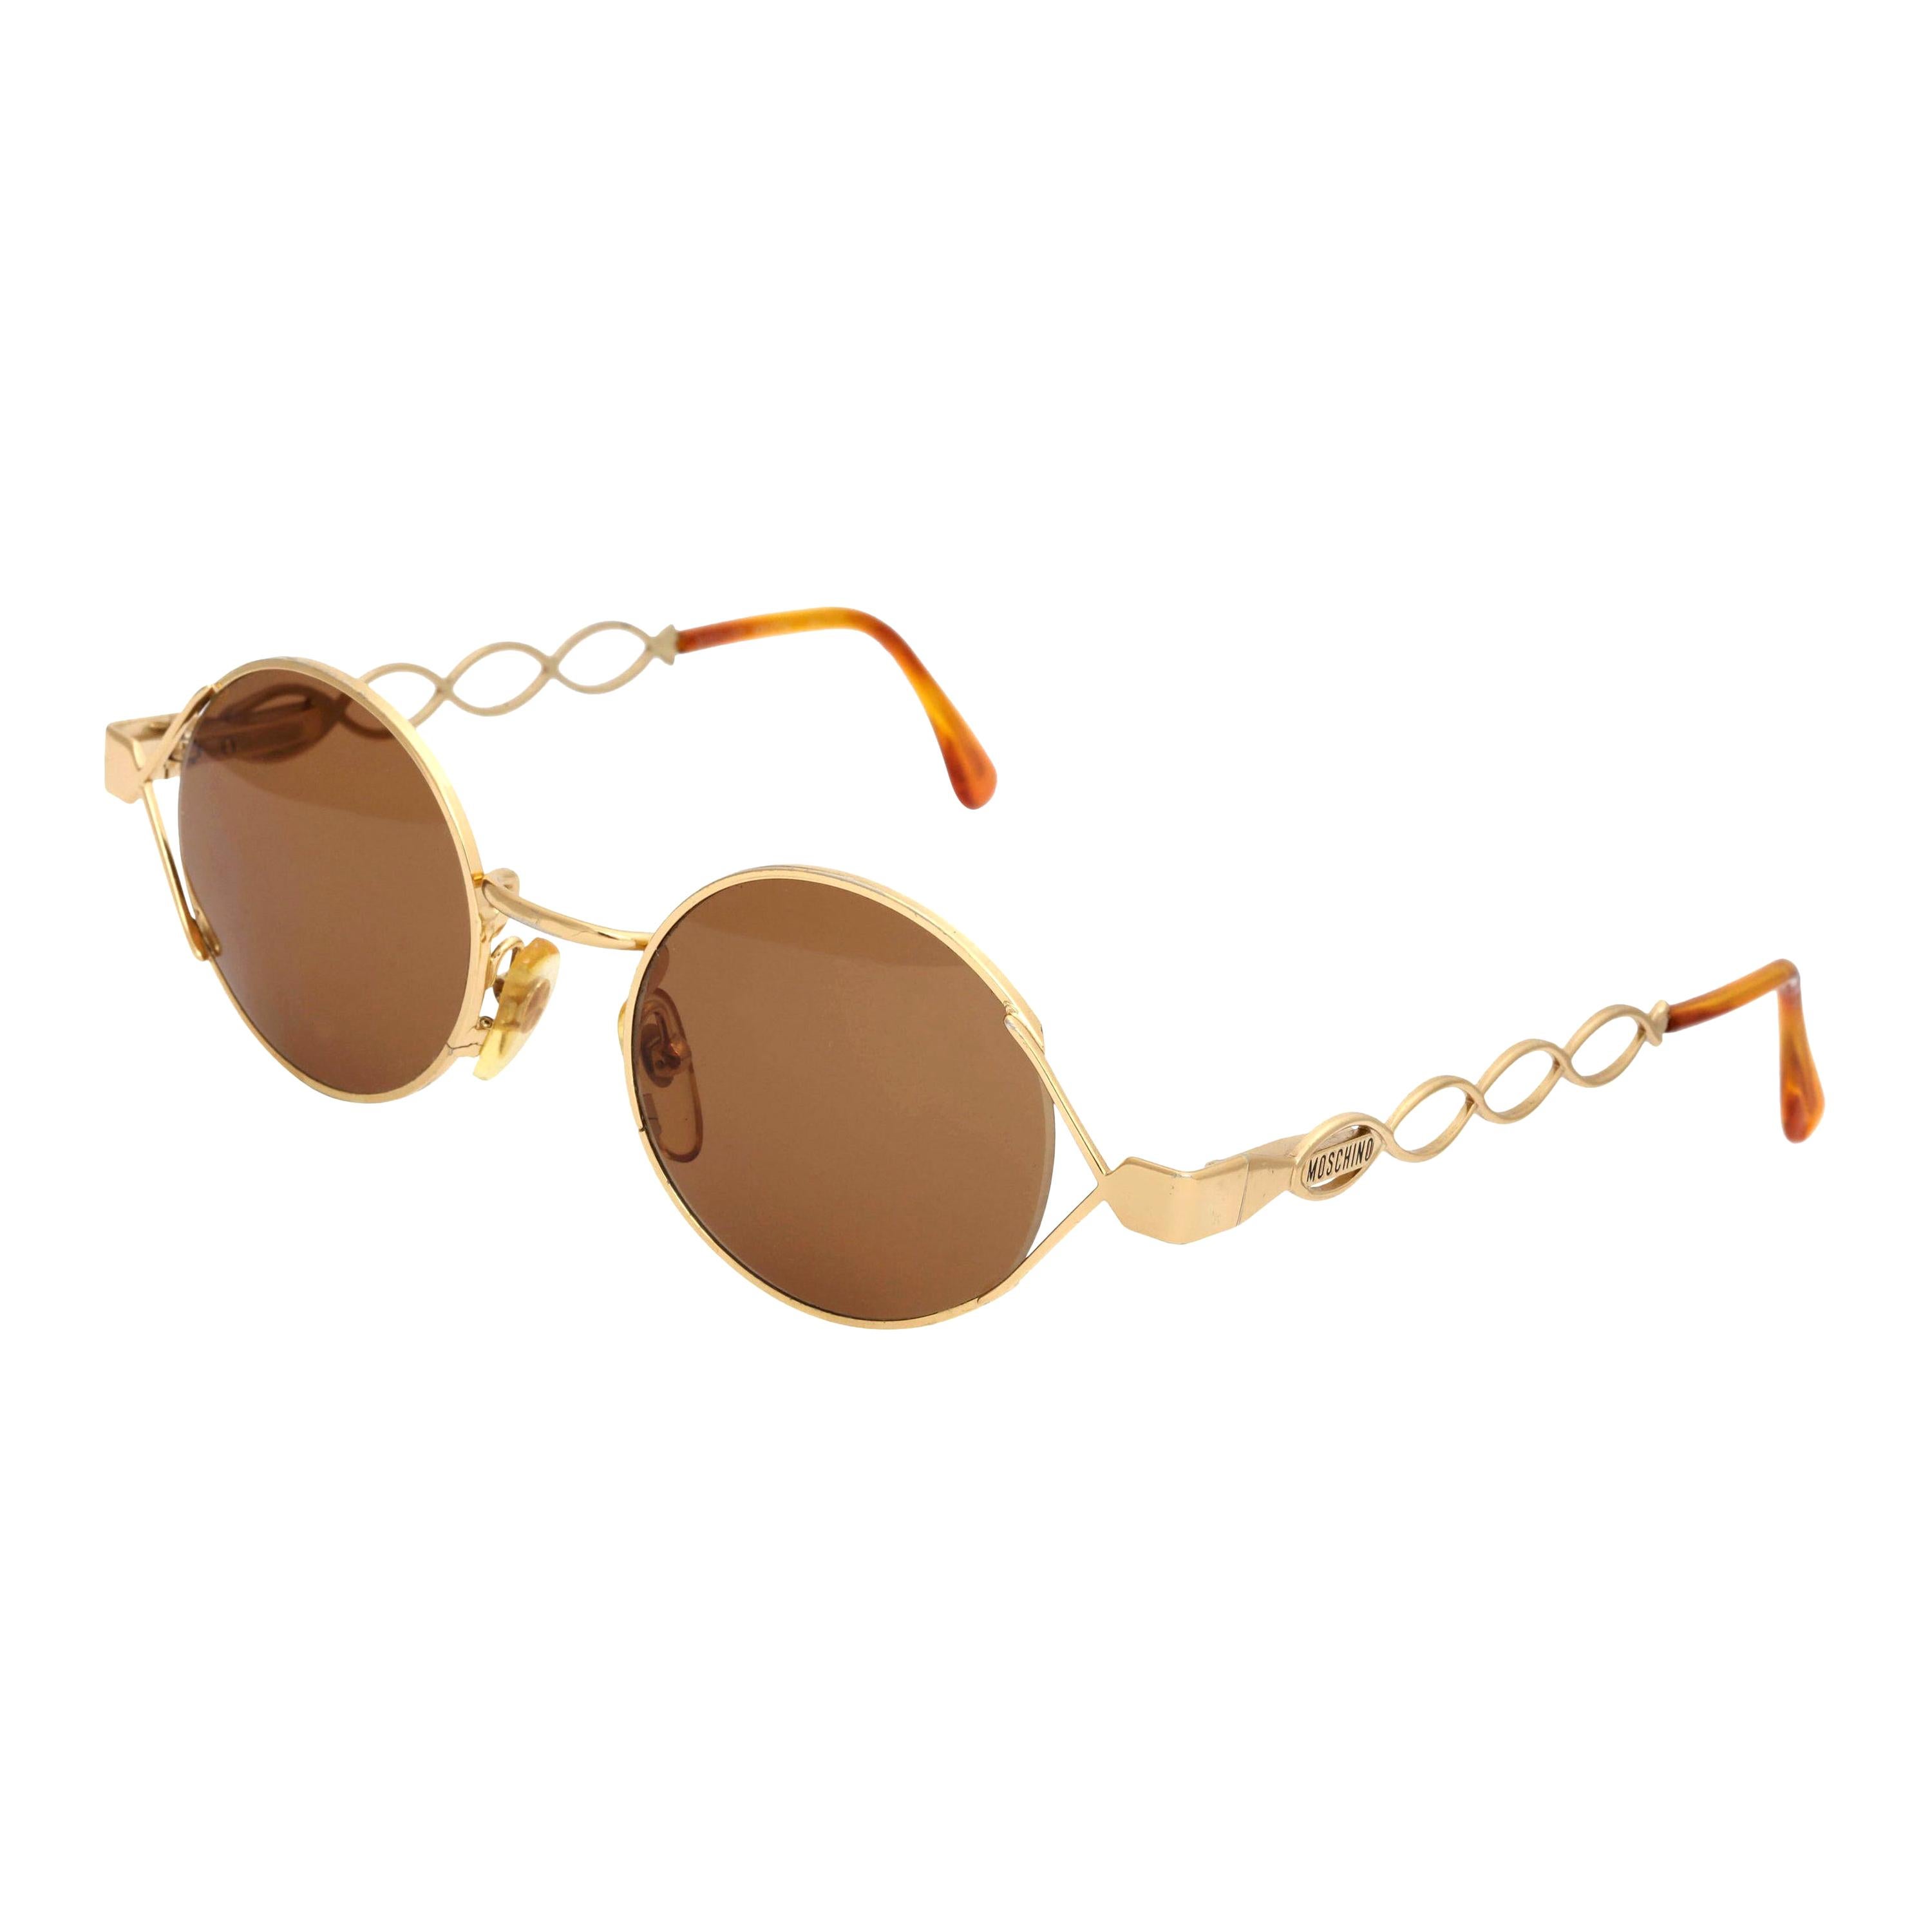 Vintage Moschino By Persol MM264 Sunglasses For Sale